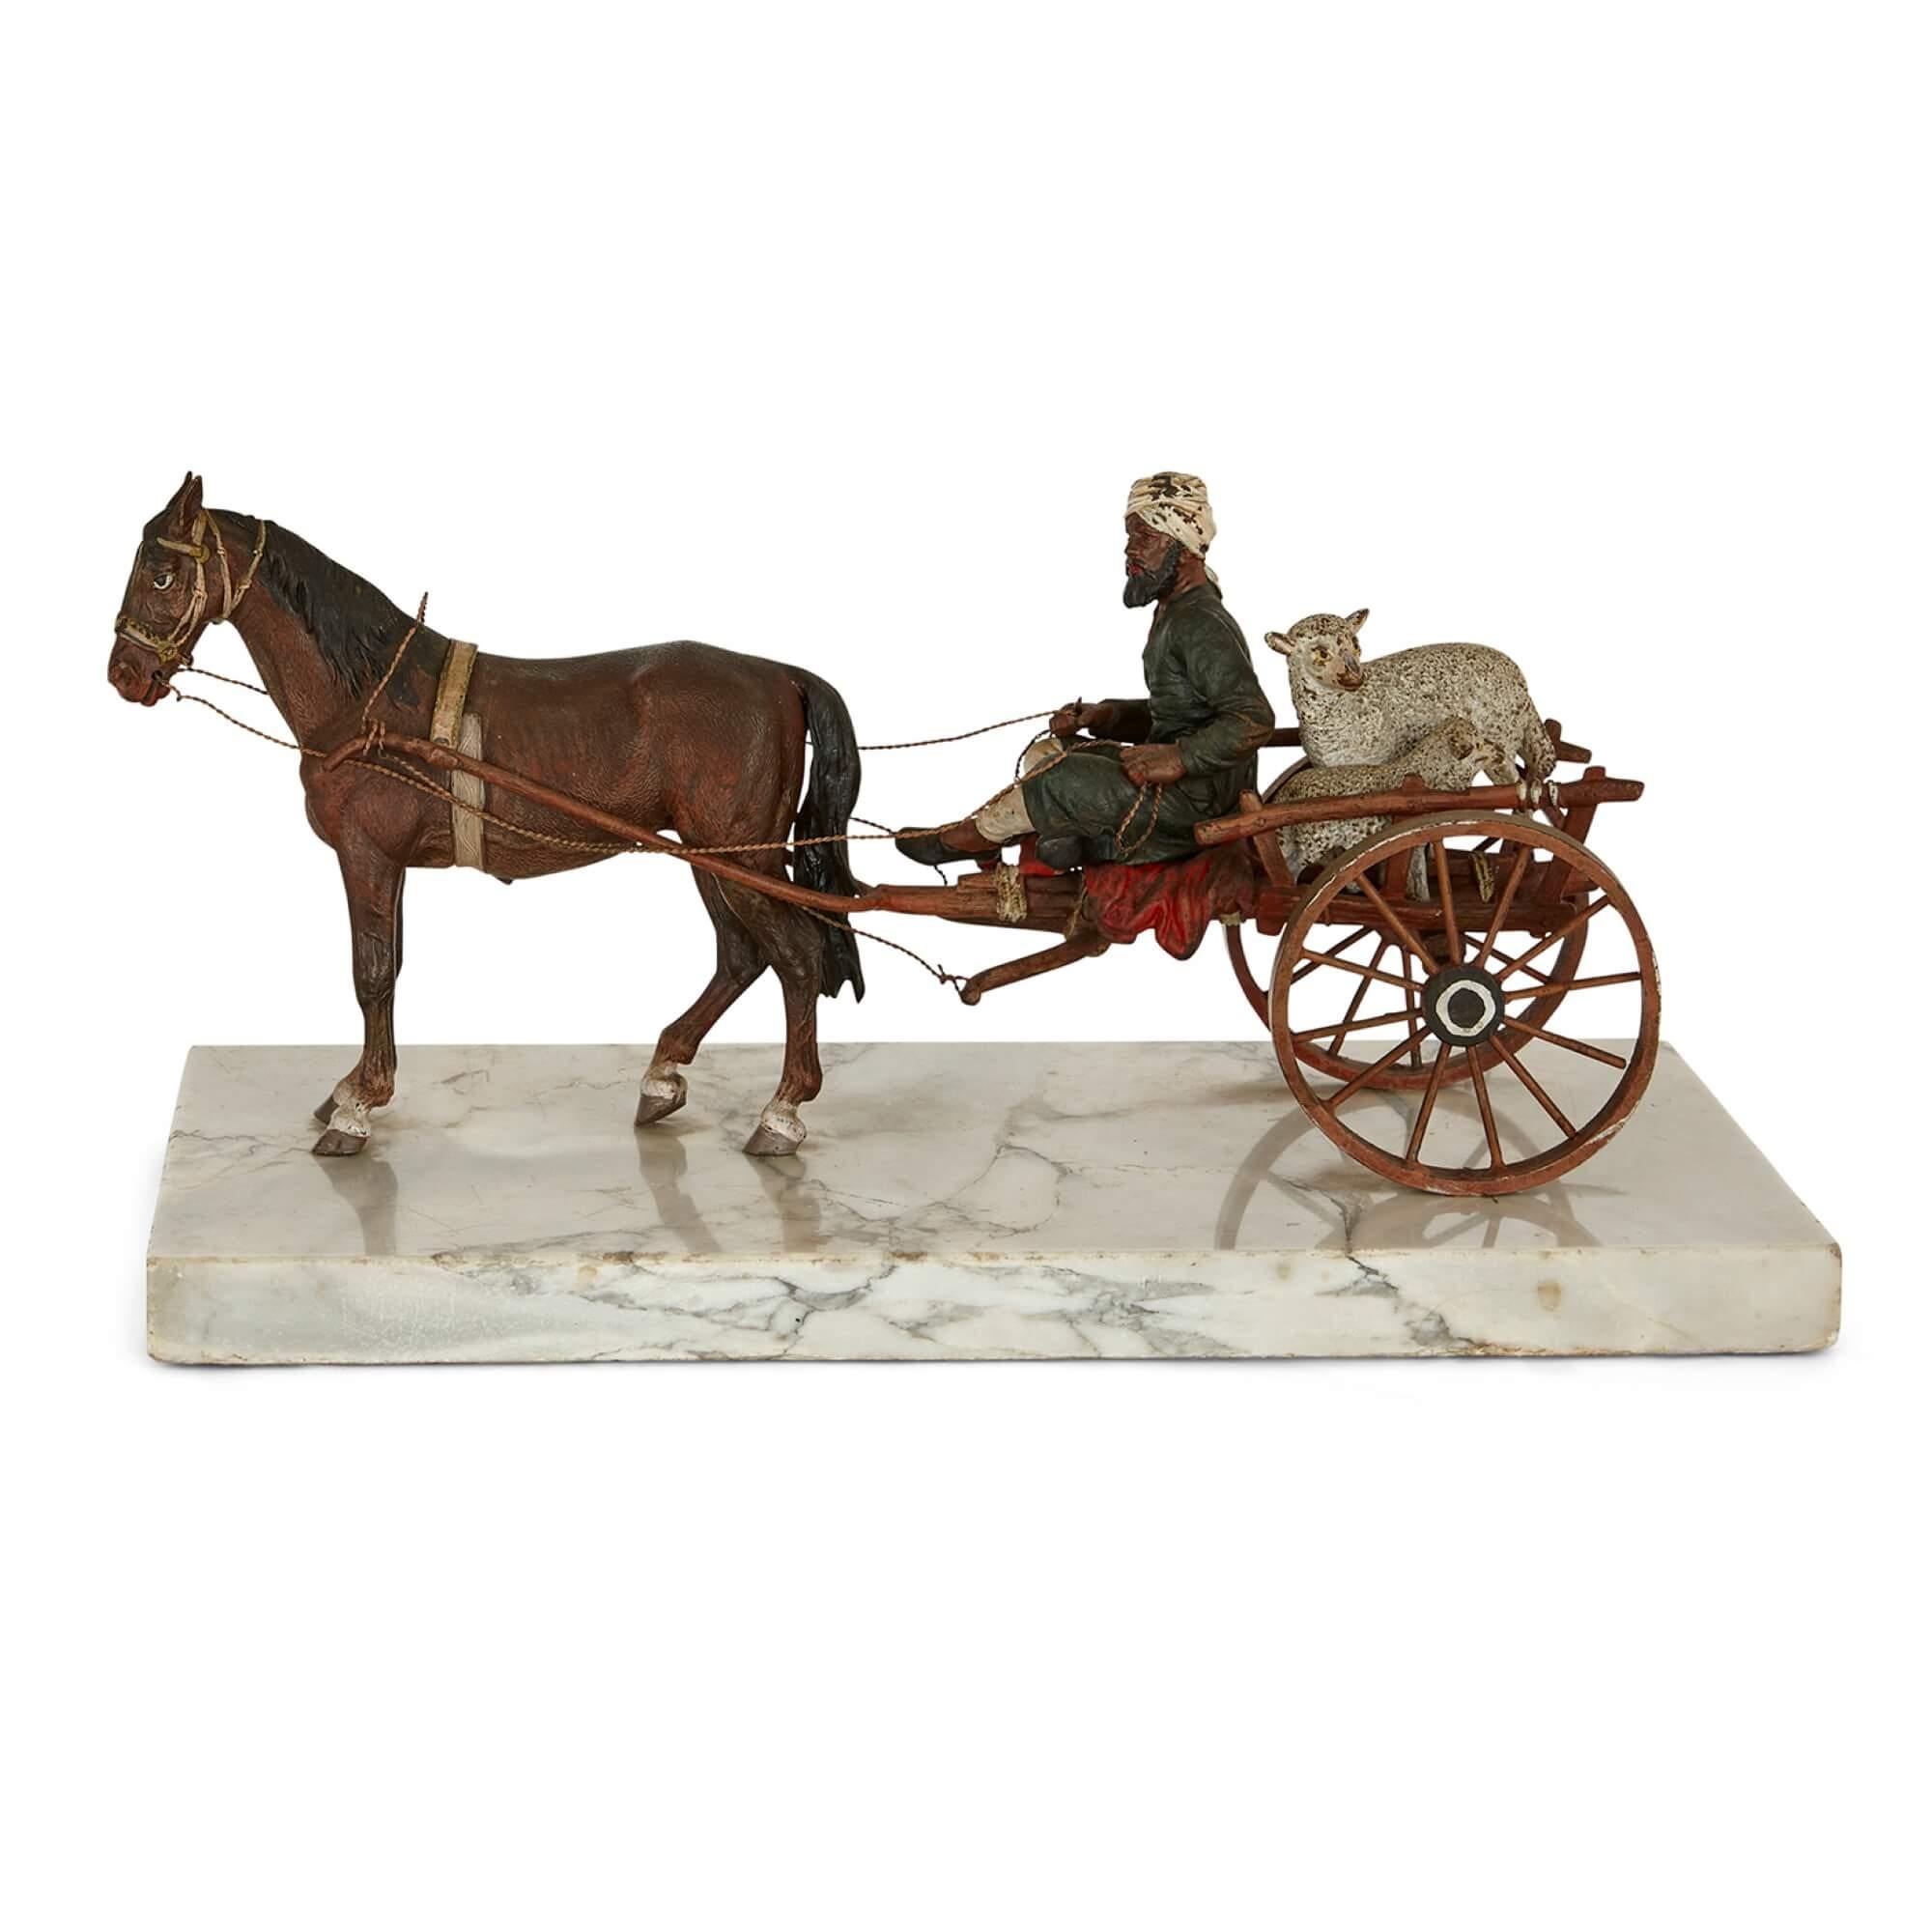 Large Austrian cold-painted bronze sculpture by Franz Xaver Bergman
Austrian, Early 20th Century 
Height 15cm, width 30cm, depth 15cm

Sculpted and made by Franz Xaver Bergman (Austrian, 1861-1936), this magnificent piece is an example of the